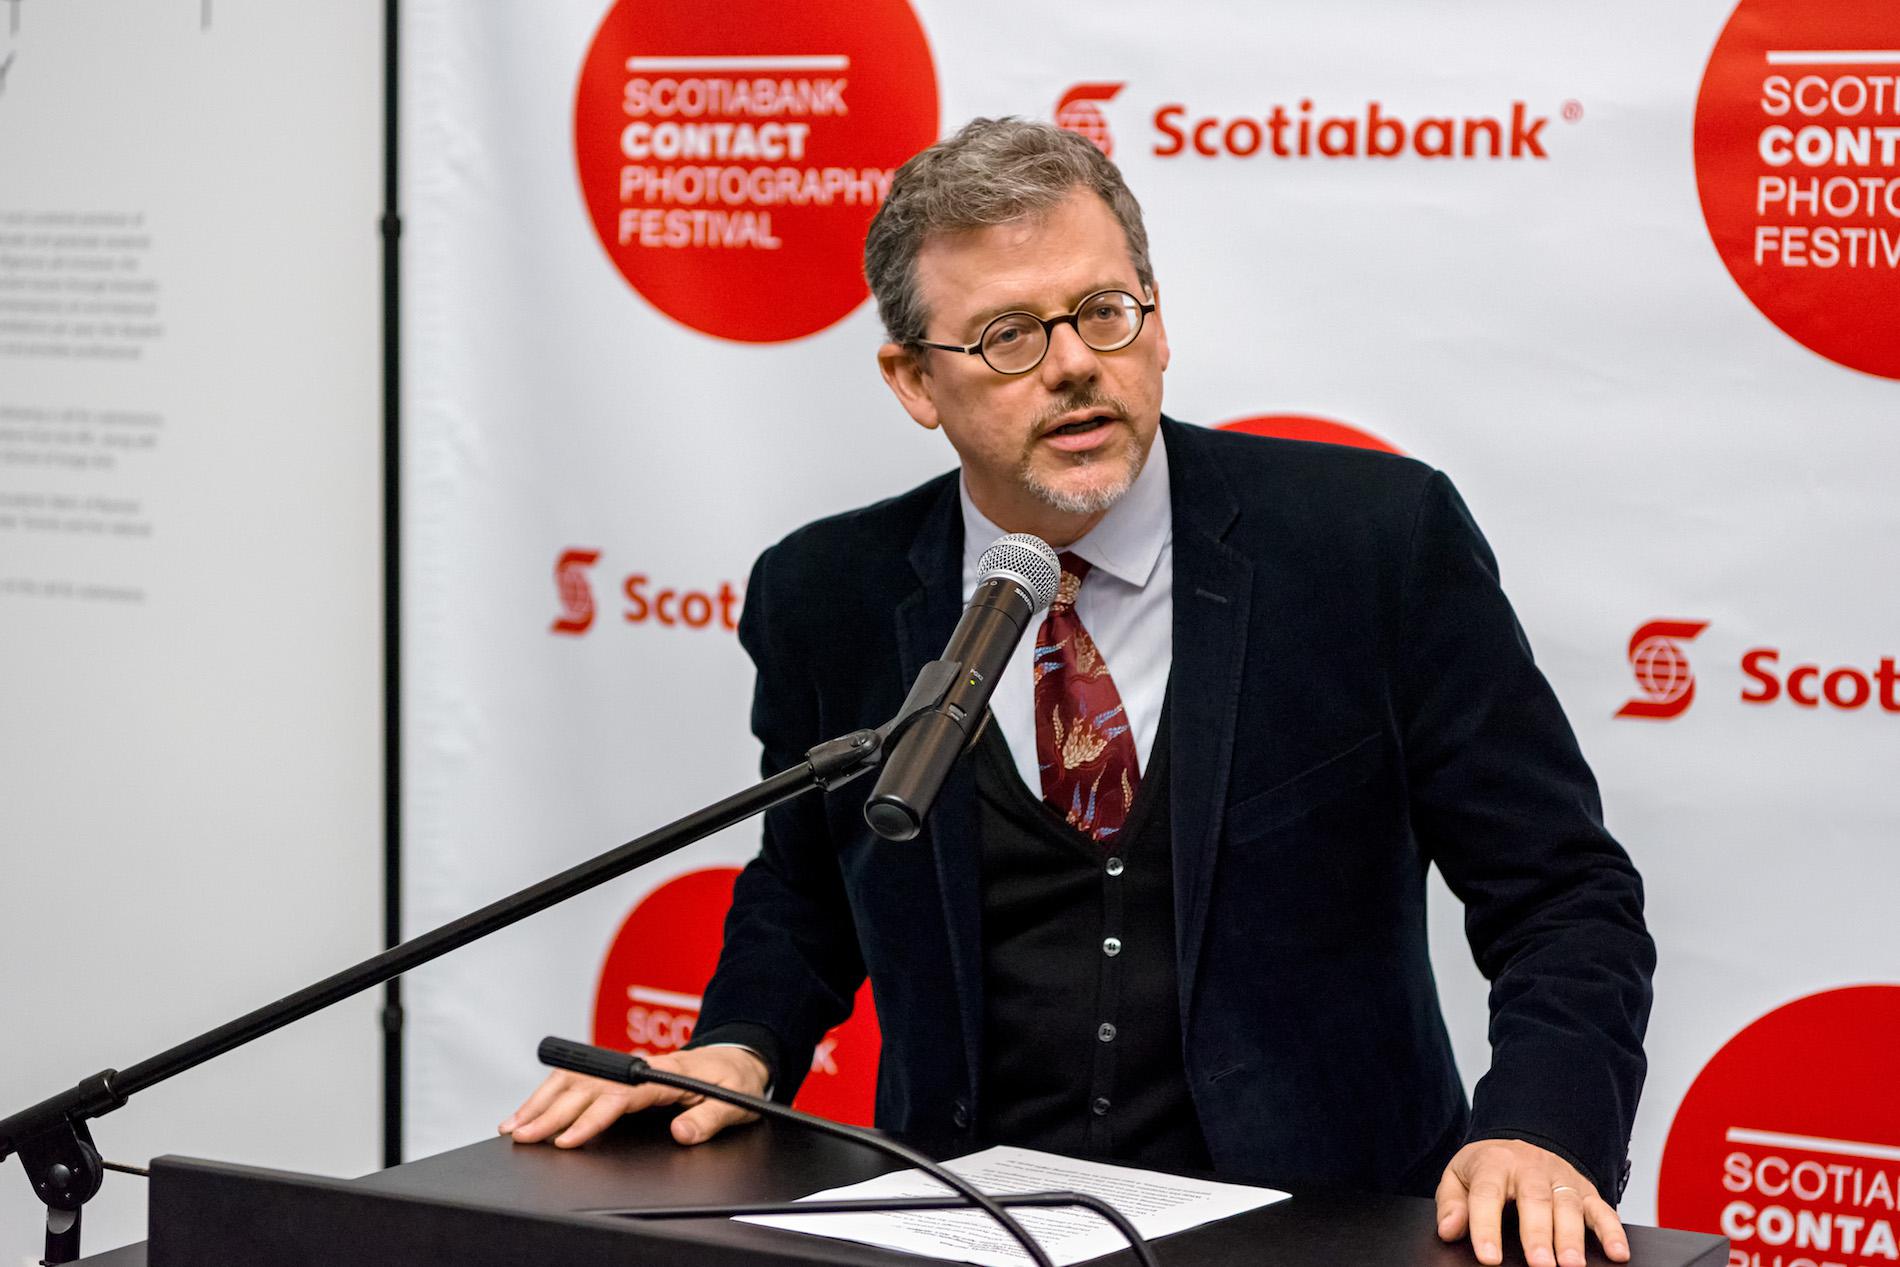 Man with circular glasses speaks into a microphone at a podium, in front of a backdrop that reads "Scotiabank Contact Photography Festival"